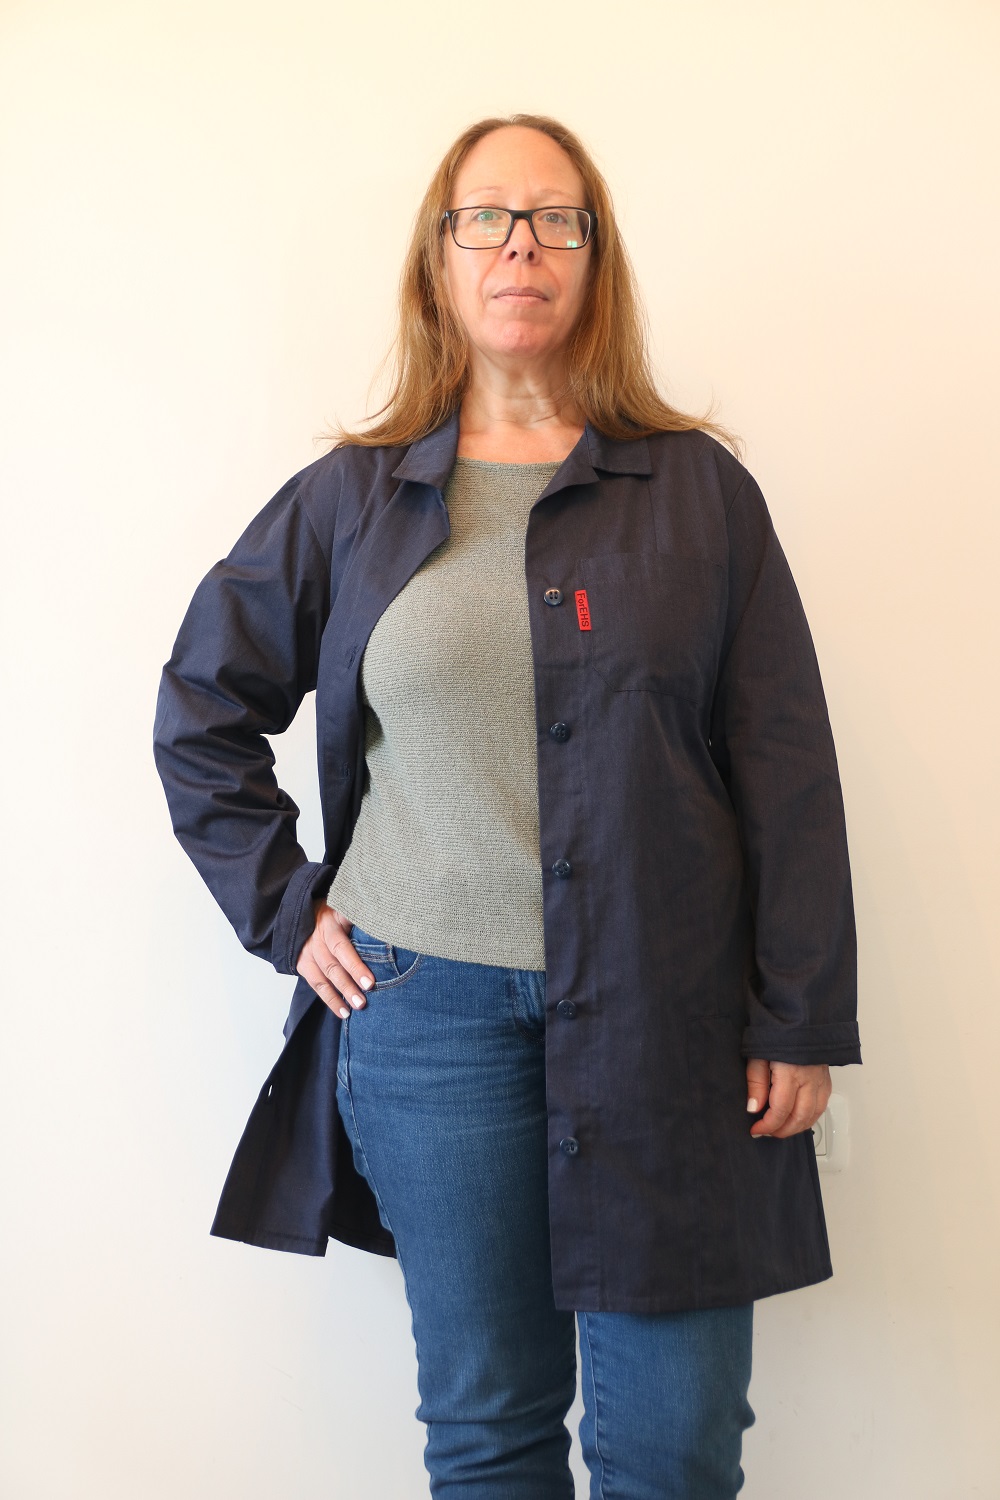 RF Protection Jacket for Women LS240